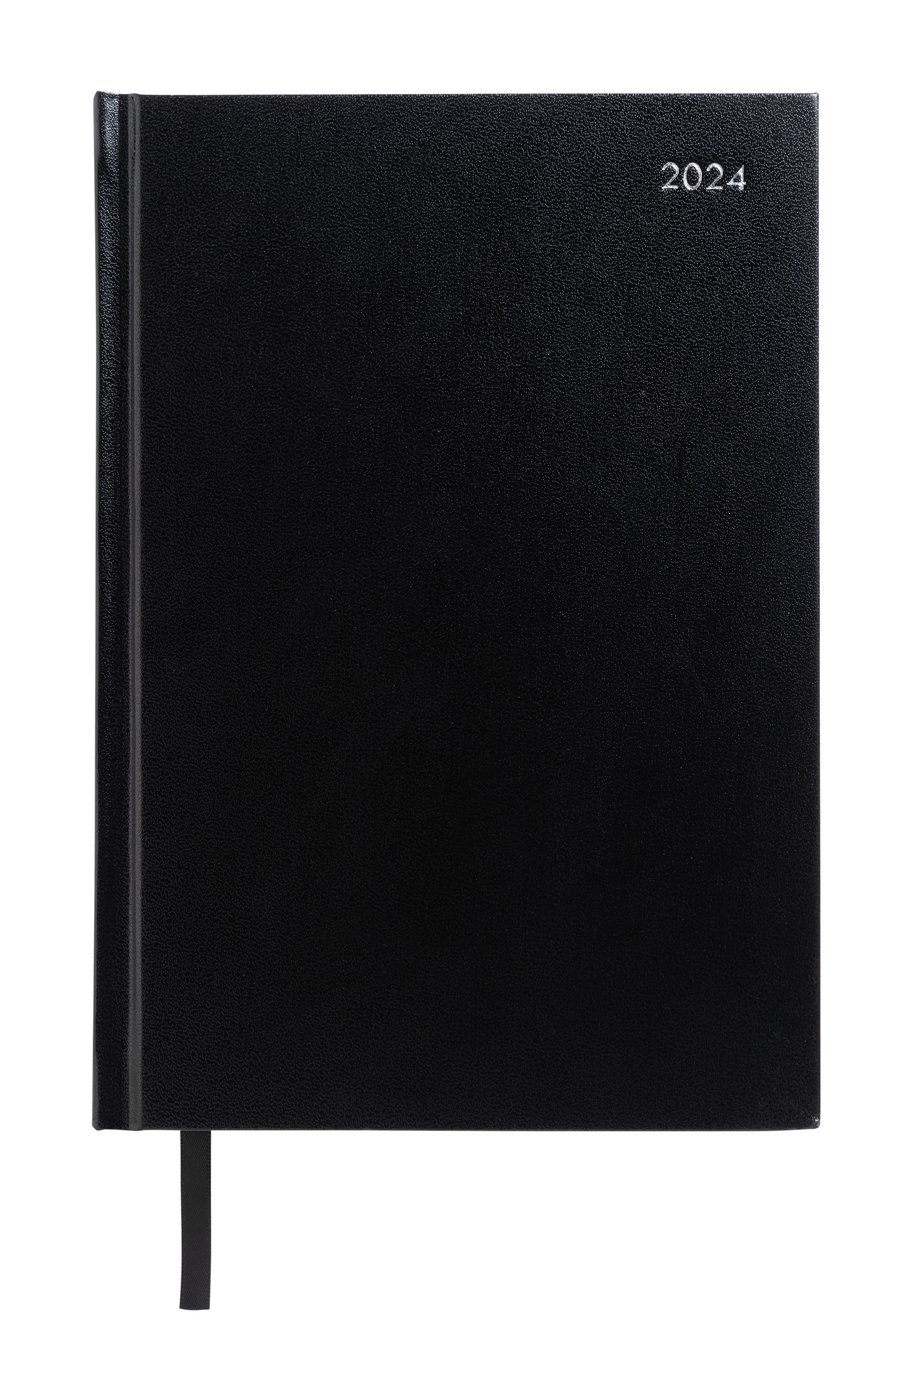 Home A5 Day To Page Black Hardbound Diary